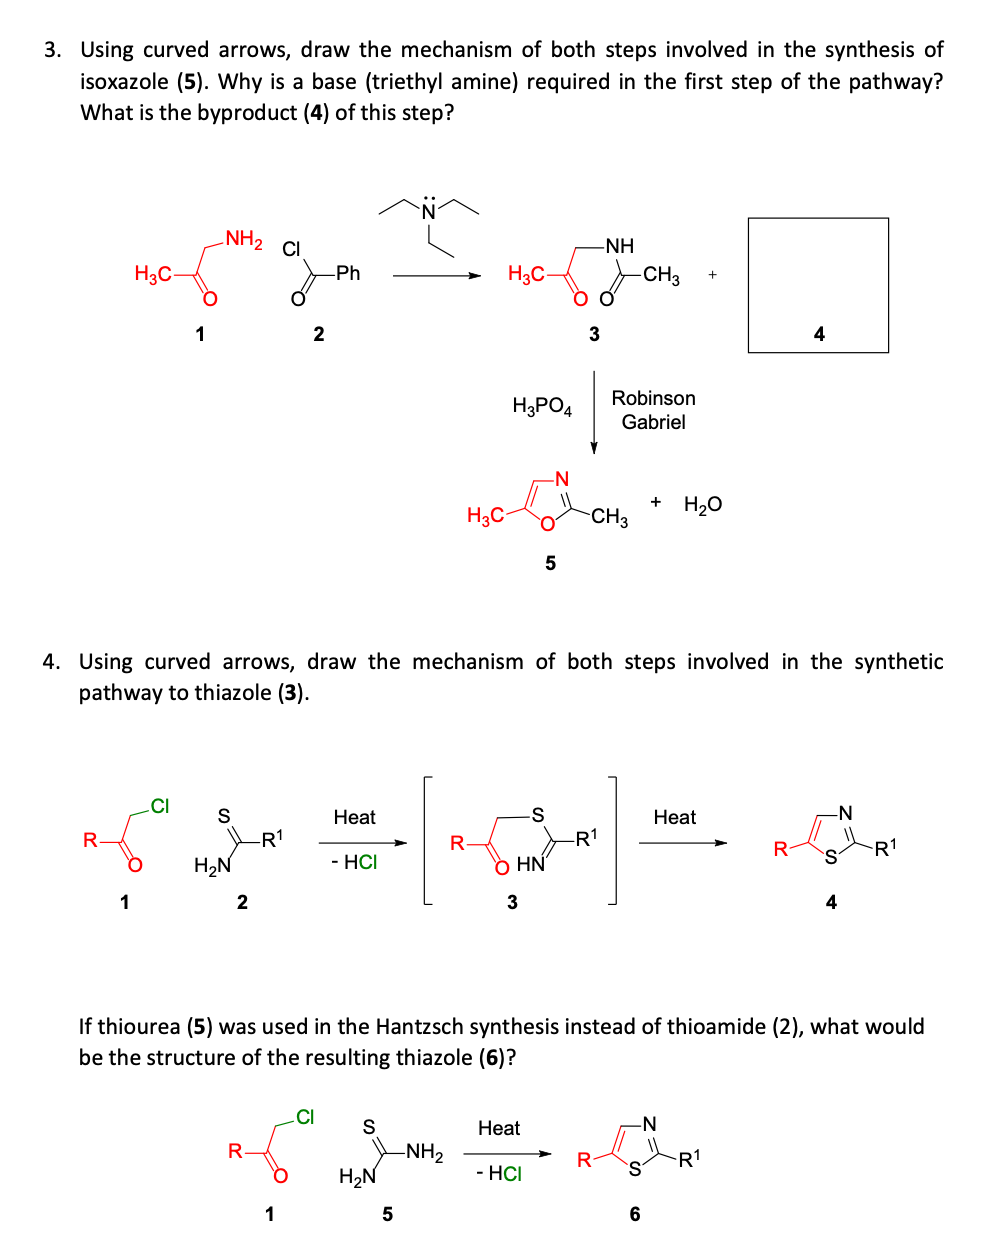 3. Using curved arrows, draw the mechanism of both steps involved in the synthesis of
isoxazole (5). Why is a base (triethyl amine) required in the first step of the pathway?
What is the byproduct (4) of this step?
NH2
CI
-NH
H3C-
Ph
H3C-
-CH3
1
4
Robinson
H3PO4
Gabriel
-N-
H3C-
CH3
H20
5
4. Using curved arrows, draw the mechanism of both steps involved in the synthetic
pathway to thiazole (3).
.CI
S
Heat
Heat
-N
-R1
R-
-R1
R1
H2N
- HCI
ò HN
S.
1
3
4
If thiourea (5) was used in the Hantzsch synthesis instead of thioamide (2), what would
be the structure of the resulting thiazole (6)?
.CI
Нeat
-N-
-NH2
H2N
R1
- HCI
1
6
